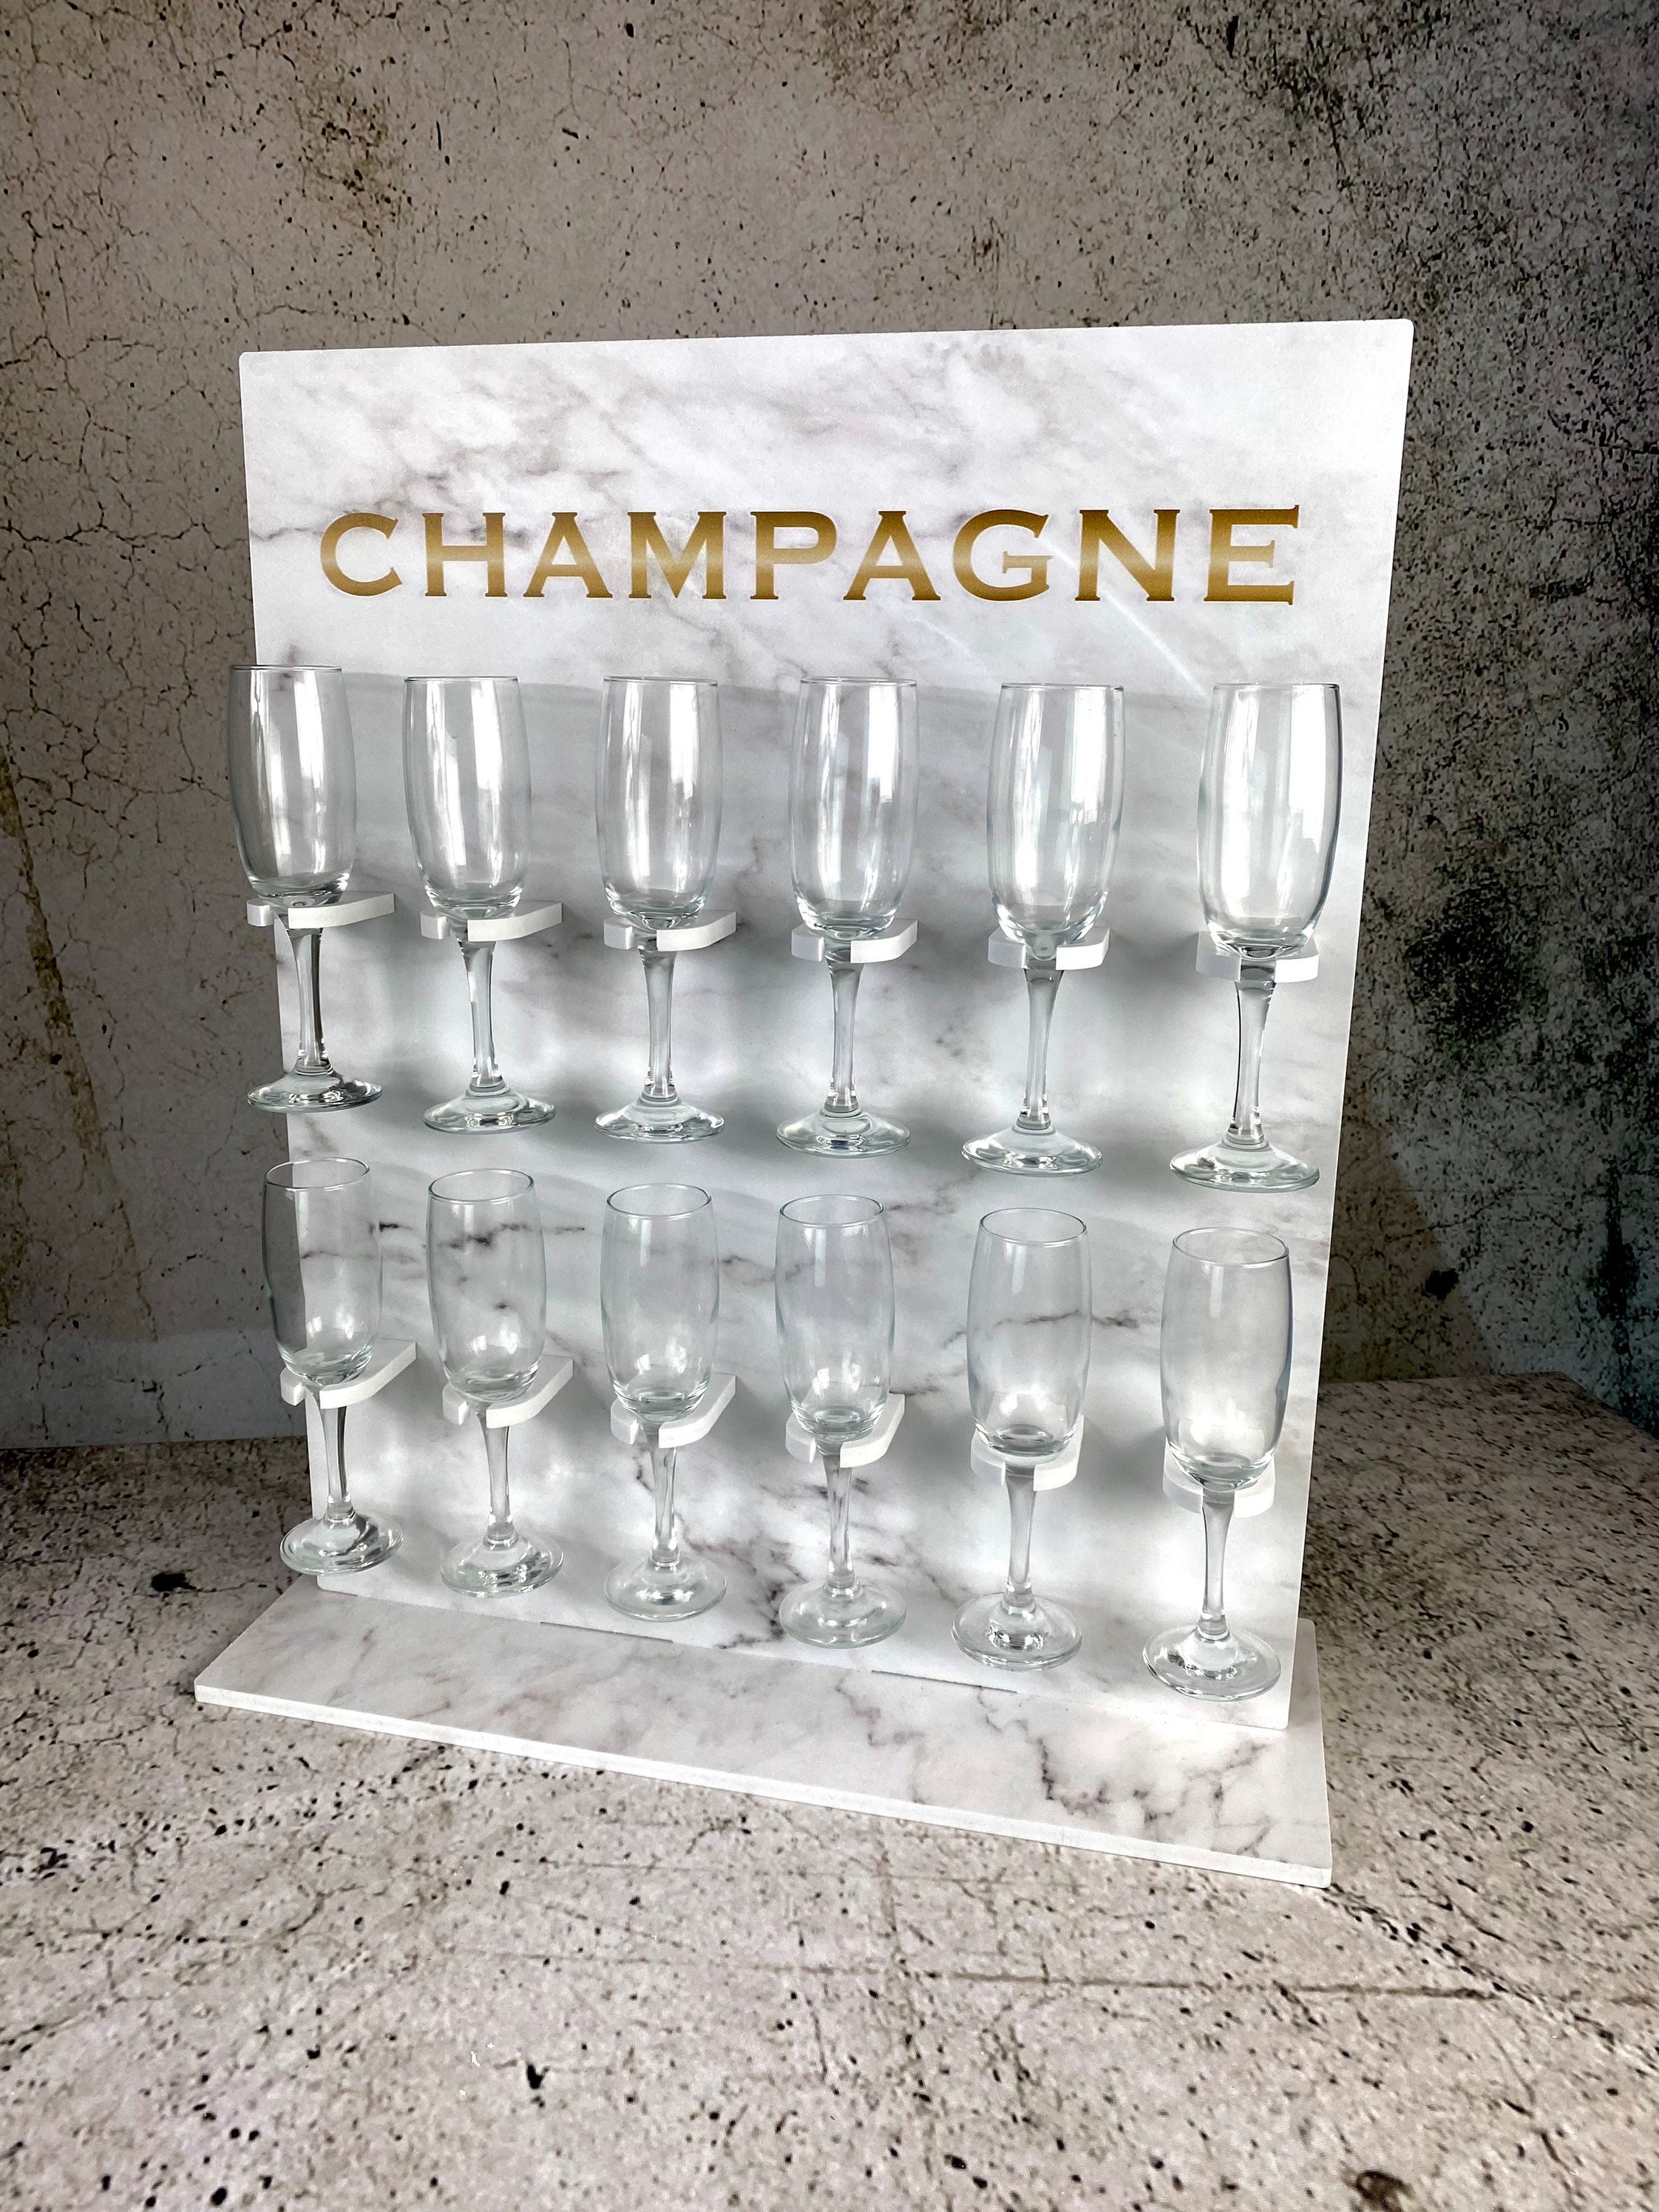  Hexsonhoma Champagne Wall Holer for Party 50, Clear